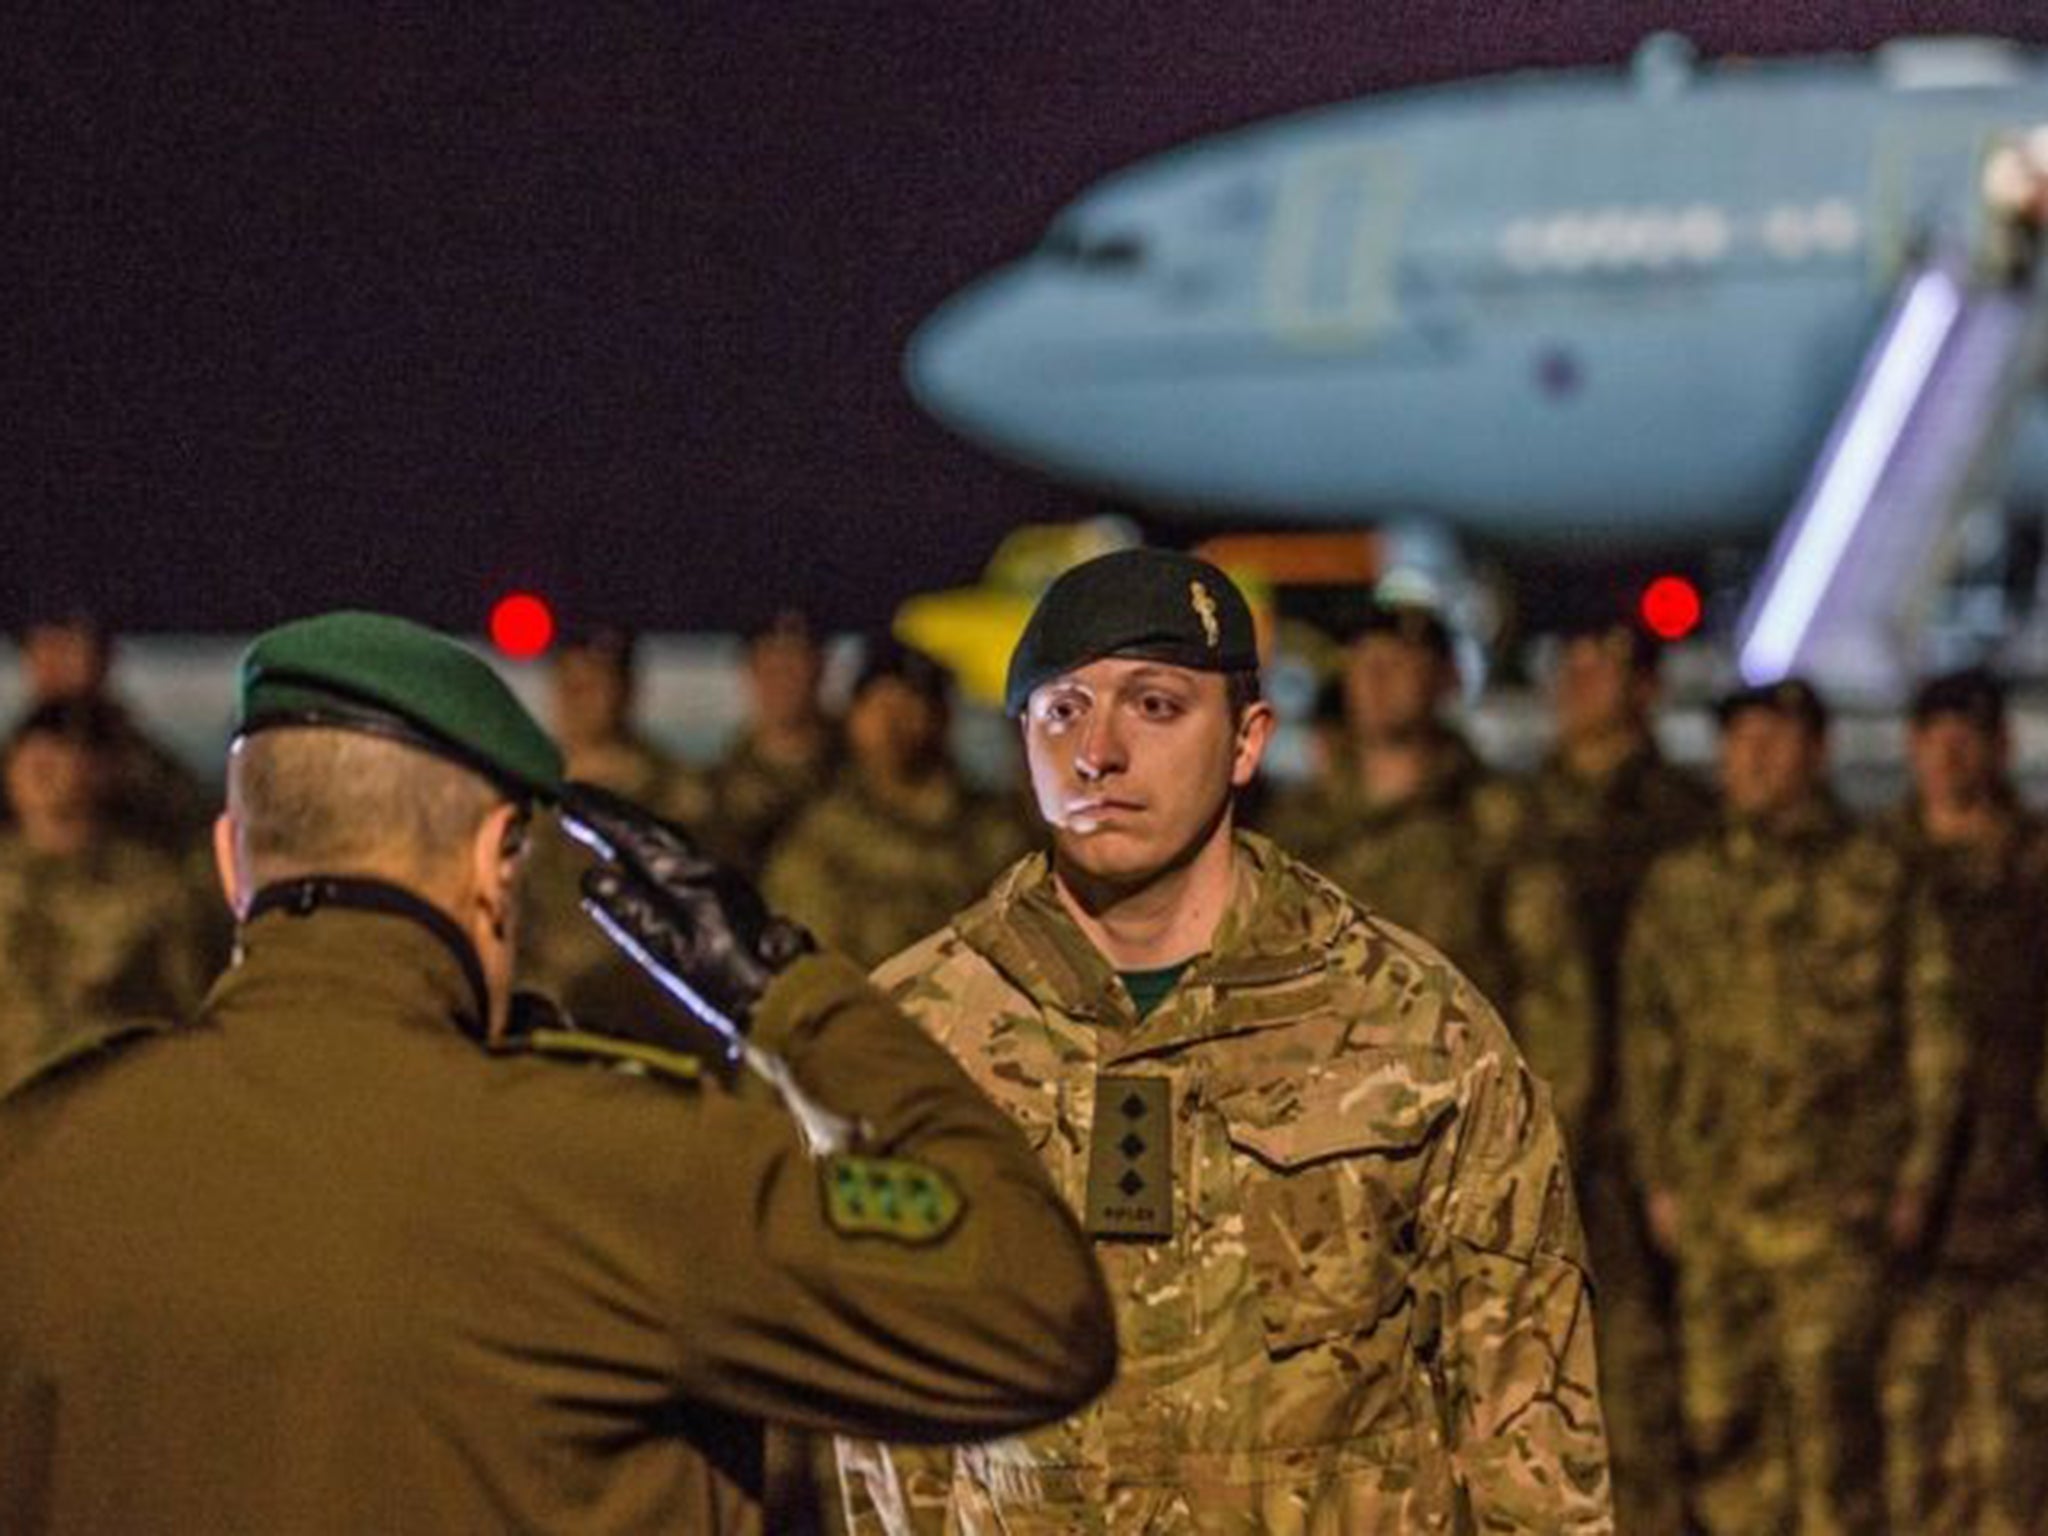 UK soldier receiving a salute as troops arrive at the Amari airbase, 25 miles south-west of Tallinn